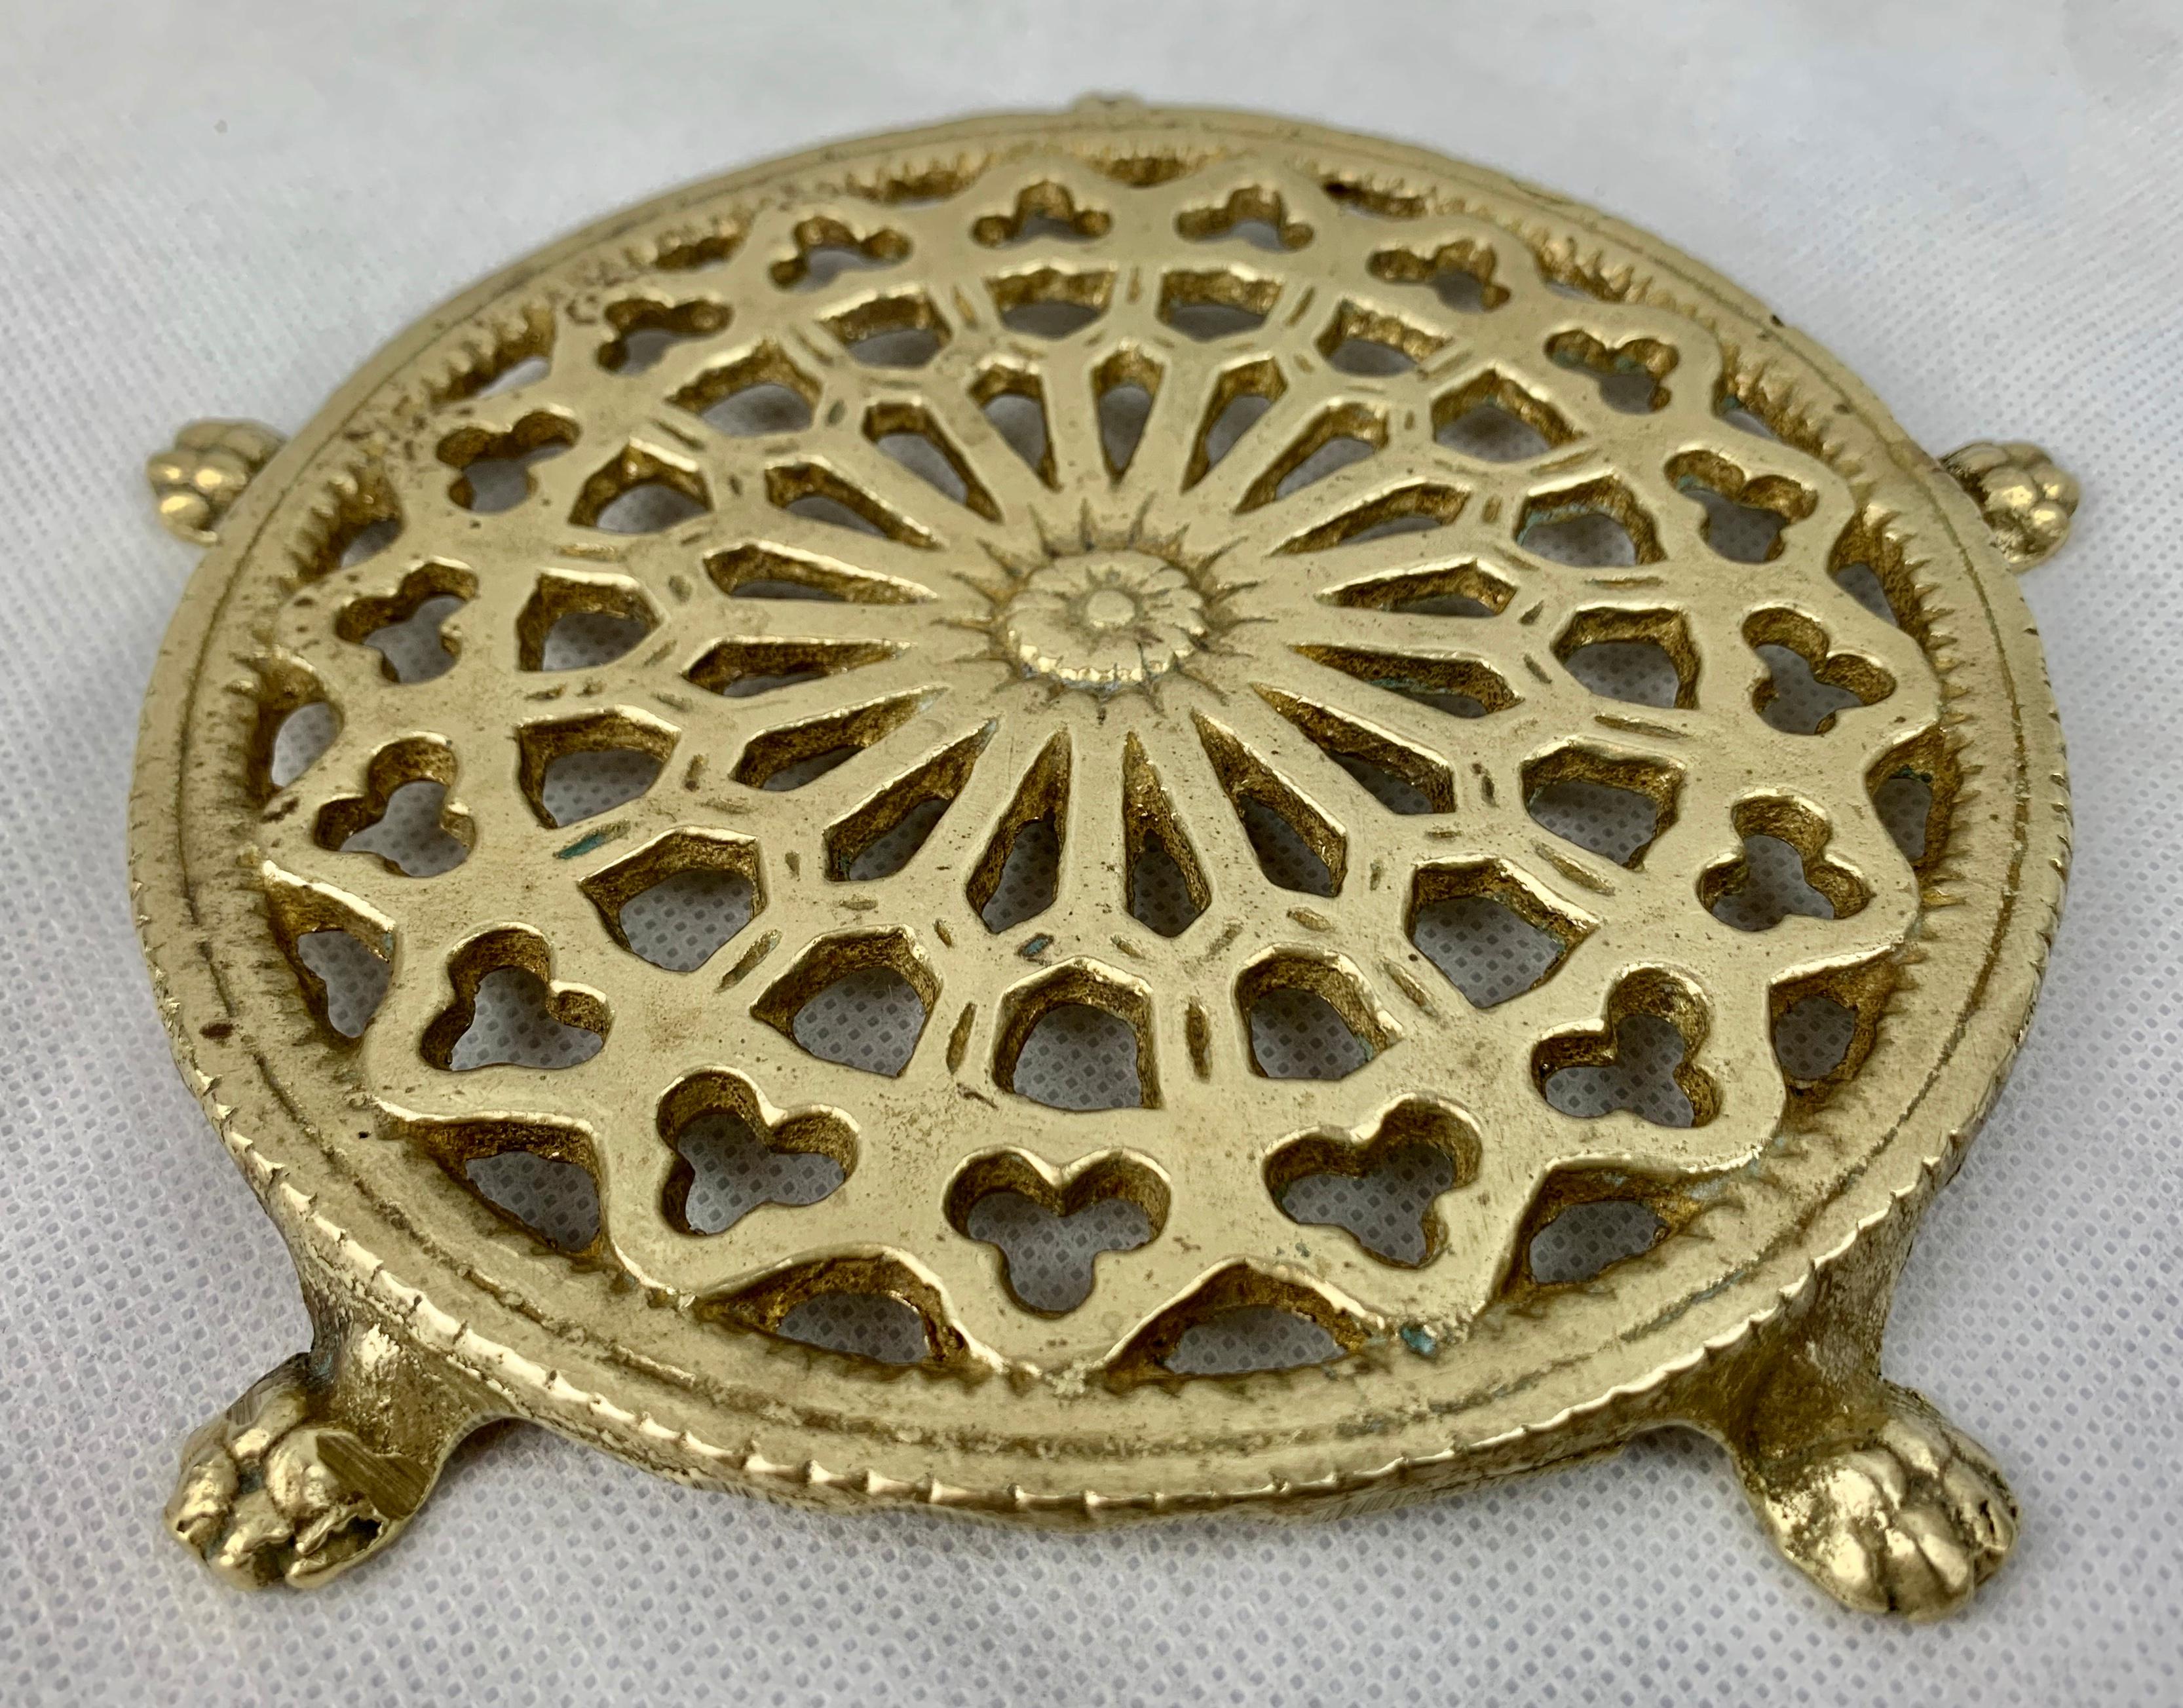 Victorian solid brass trivet with intricate pierced design. The trivet rests on five lion's paw feet and was originally used on a table to hold hot or cold items. Why not use it under a plant or under any item just to elevate and bring attention to